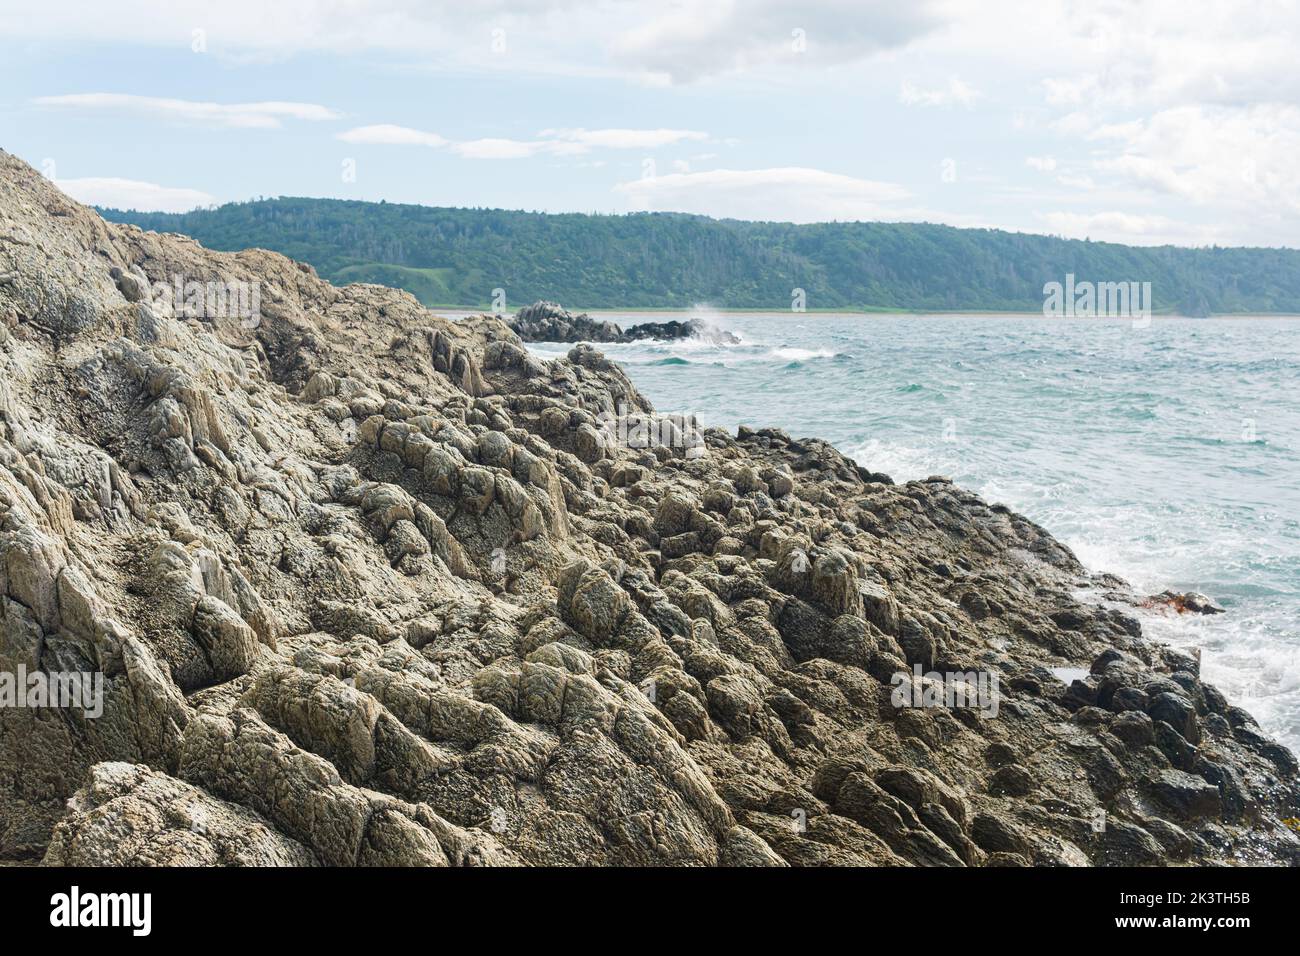 coastal cliff formed by solidified lava close-up against the background of a distant sea shore Stock Photo